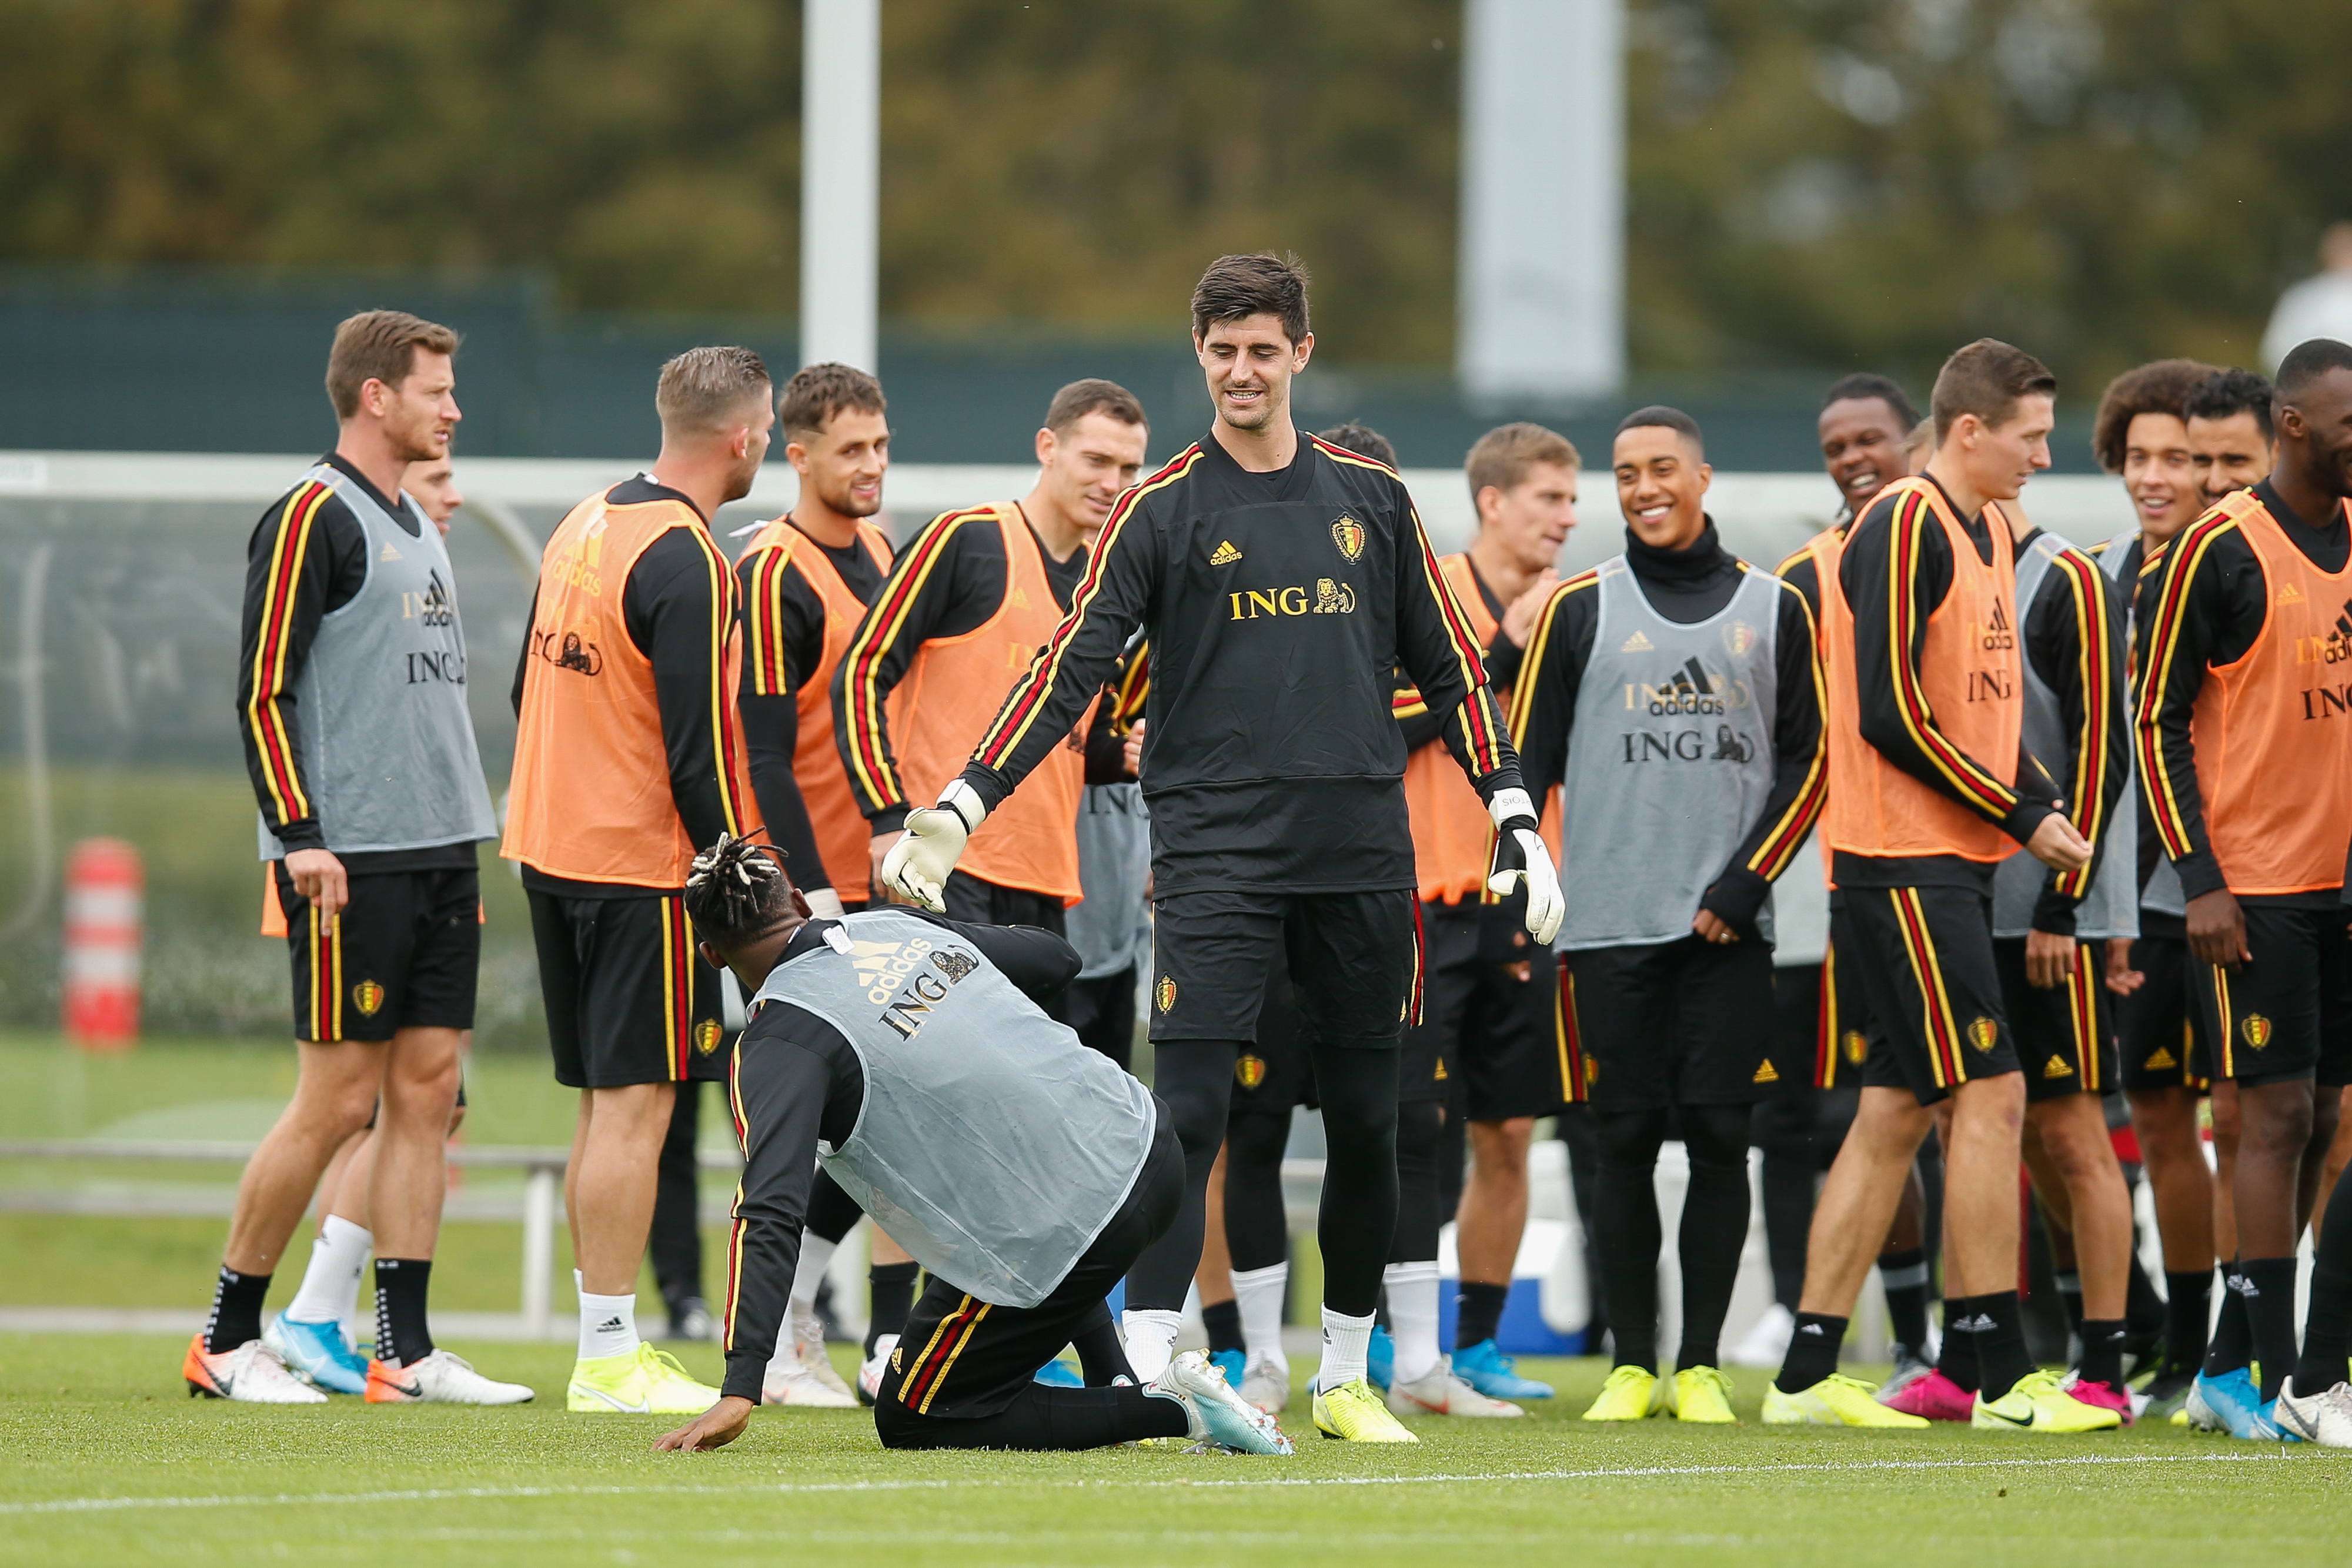 Belgium's Michy Batshuayi and Belgium's goalkeeper Thibaut Courtois pictured during a training of Belgian national soccer team Red Devils, Tuesday 08 October 2019 in Tubize. The team will be playing two European Cup 2020 qualification games against San Marino and Kazakhstan. BELGA PHOTO BRUNO FAHY (Photo by BRUNO FAHY/BELGA MAG/AFP via Getty Images)